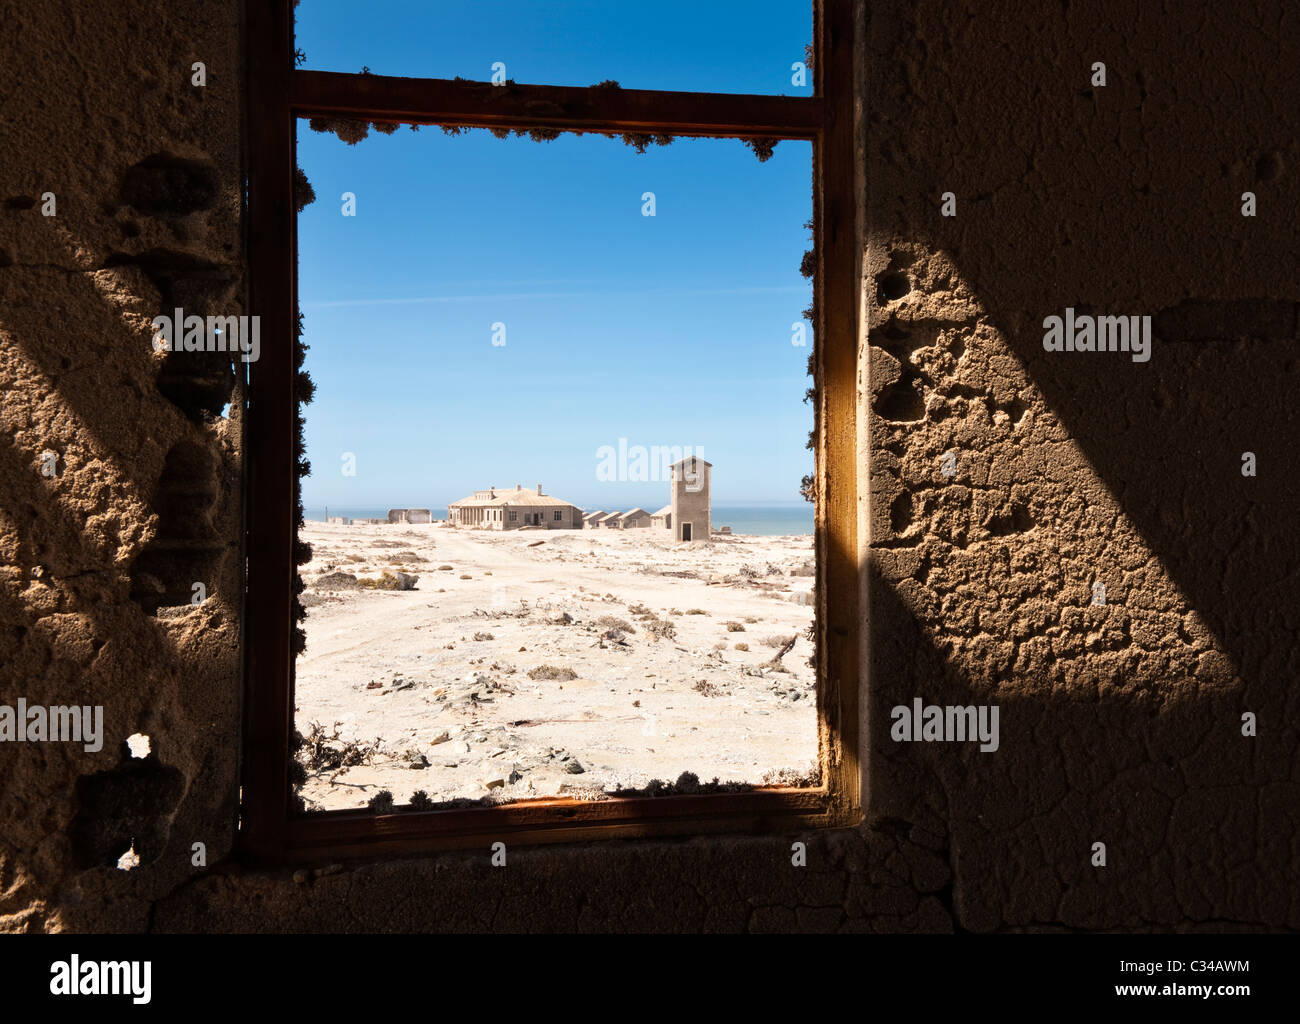 Ghost mining town, Elizabeth Bay, Namibia, Africa Stock Photo